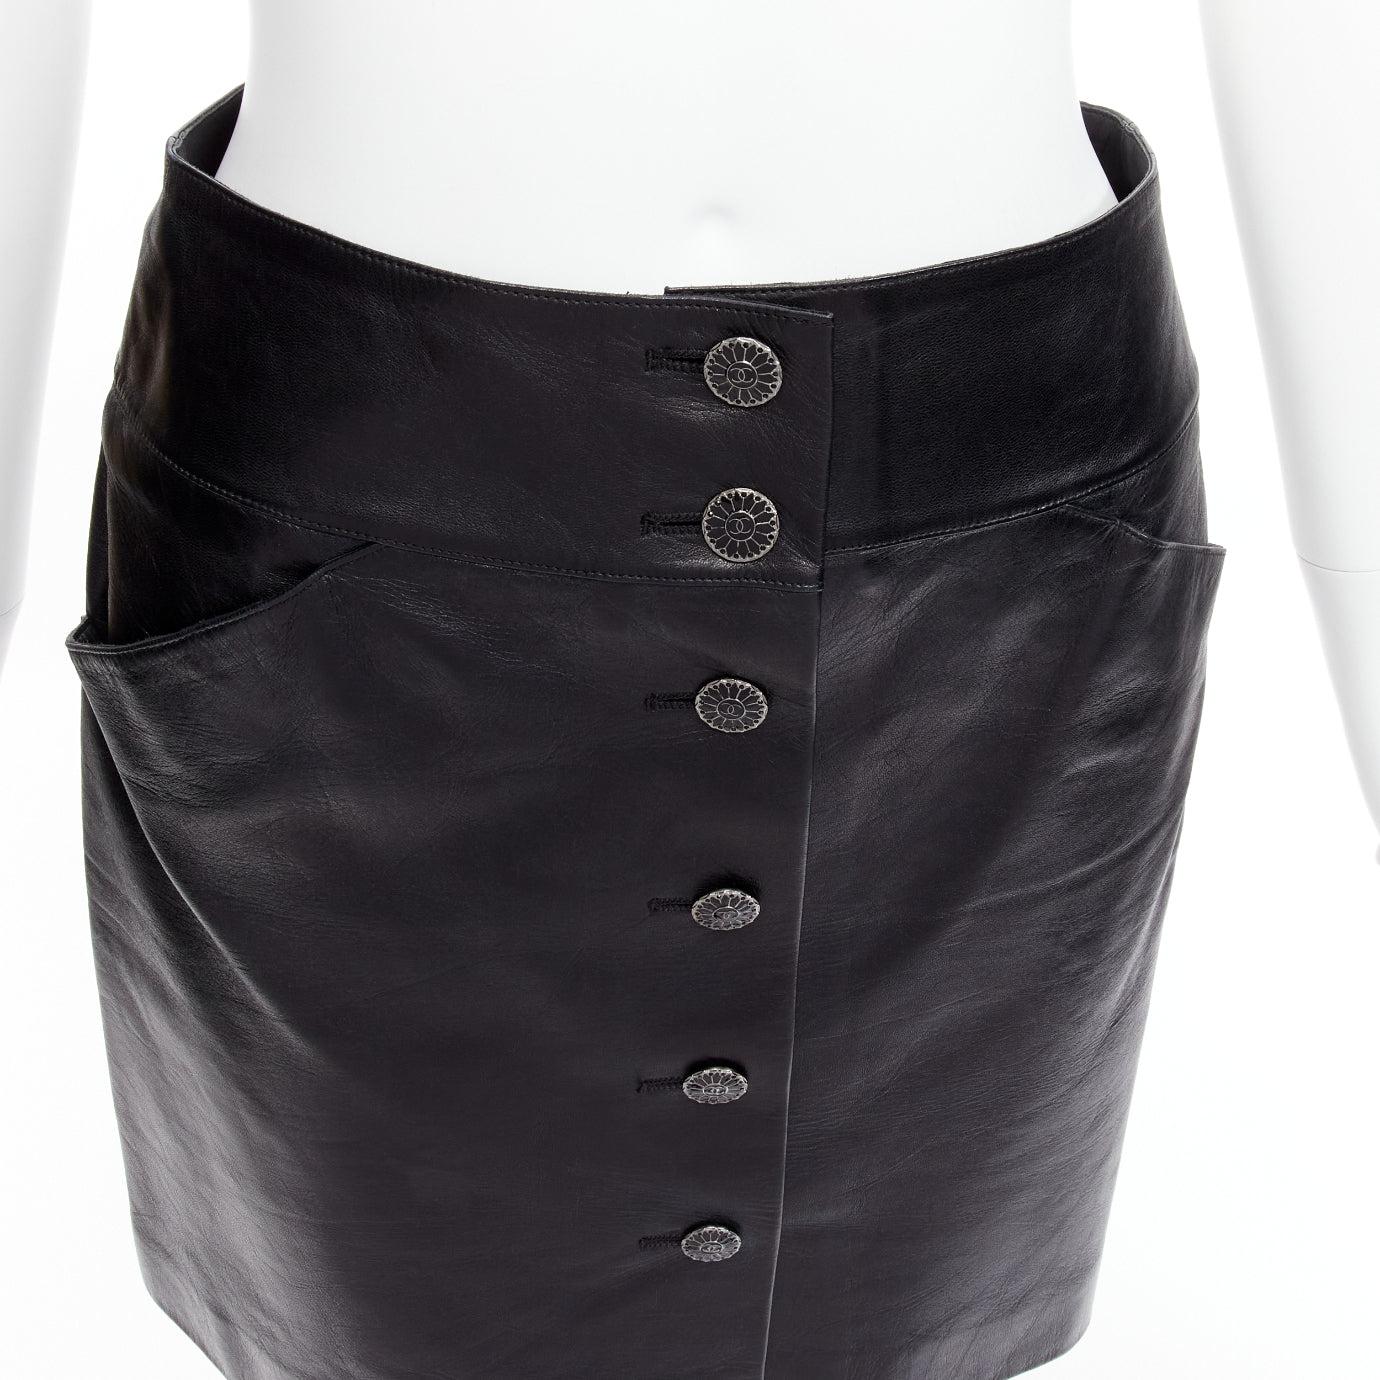 CHANEL 06A black lambskin leather CC logo button A-line mini skirt FR34 XS
Reference: TGAS/D00296
Brand: Chanel
Designer: Karl Lagerfeld
Collection: 06A
Material: Lambskin Leather
Color: Black
Pattern: Solid
Closure: Button
Lining: Black